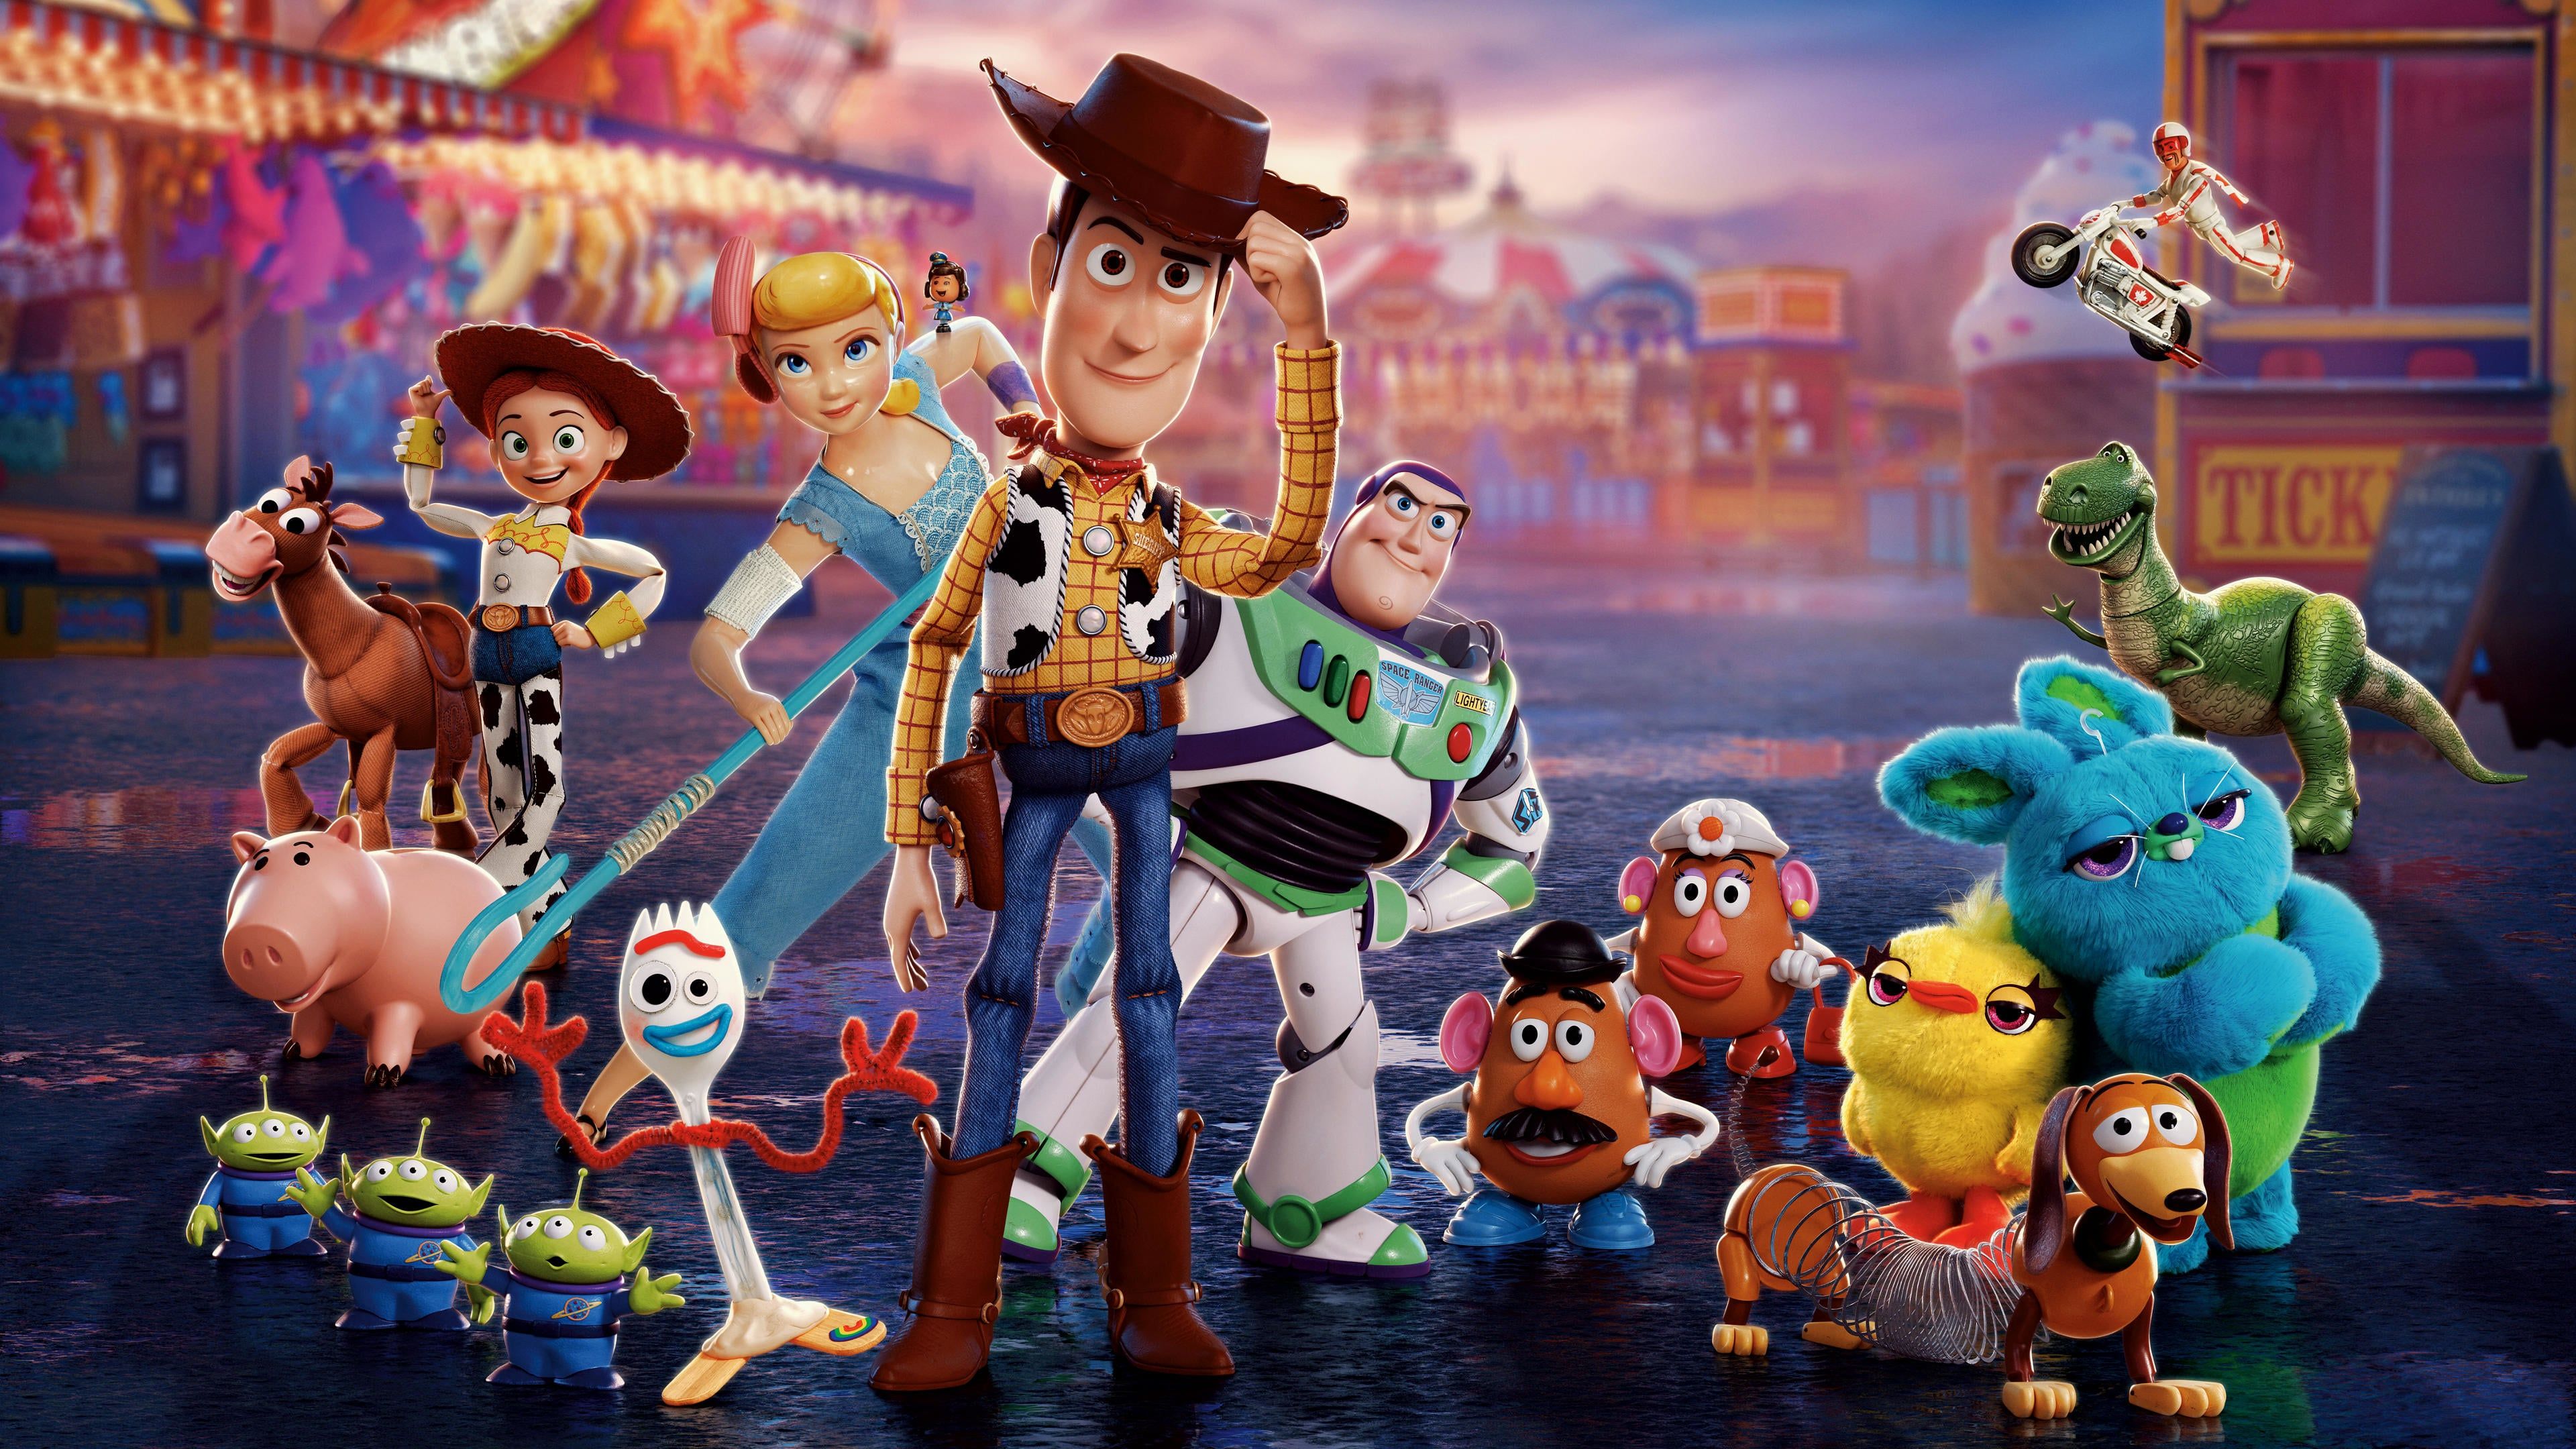 Toy Story 4 Personajes Poster Wallpaper 4k Ultra HD ID: 3326